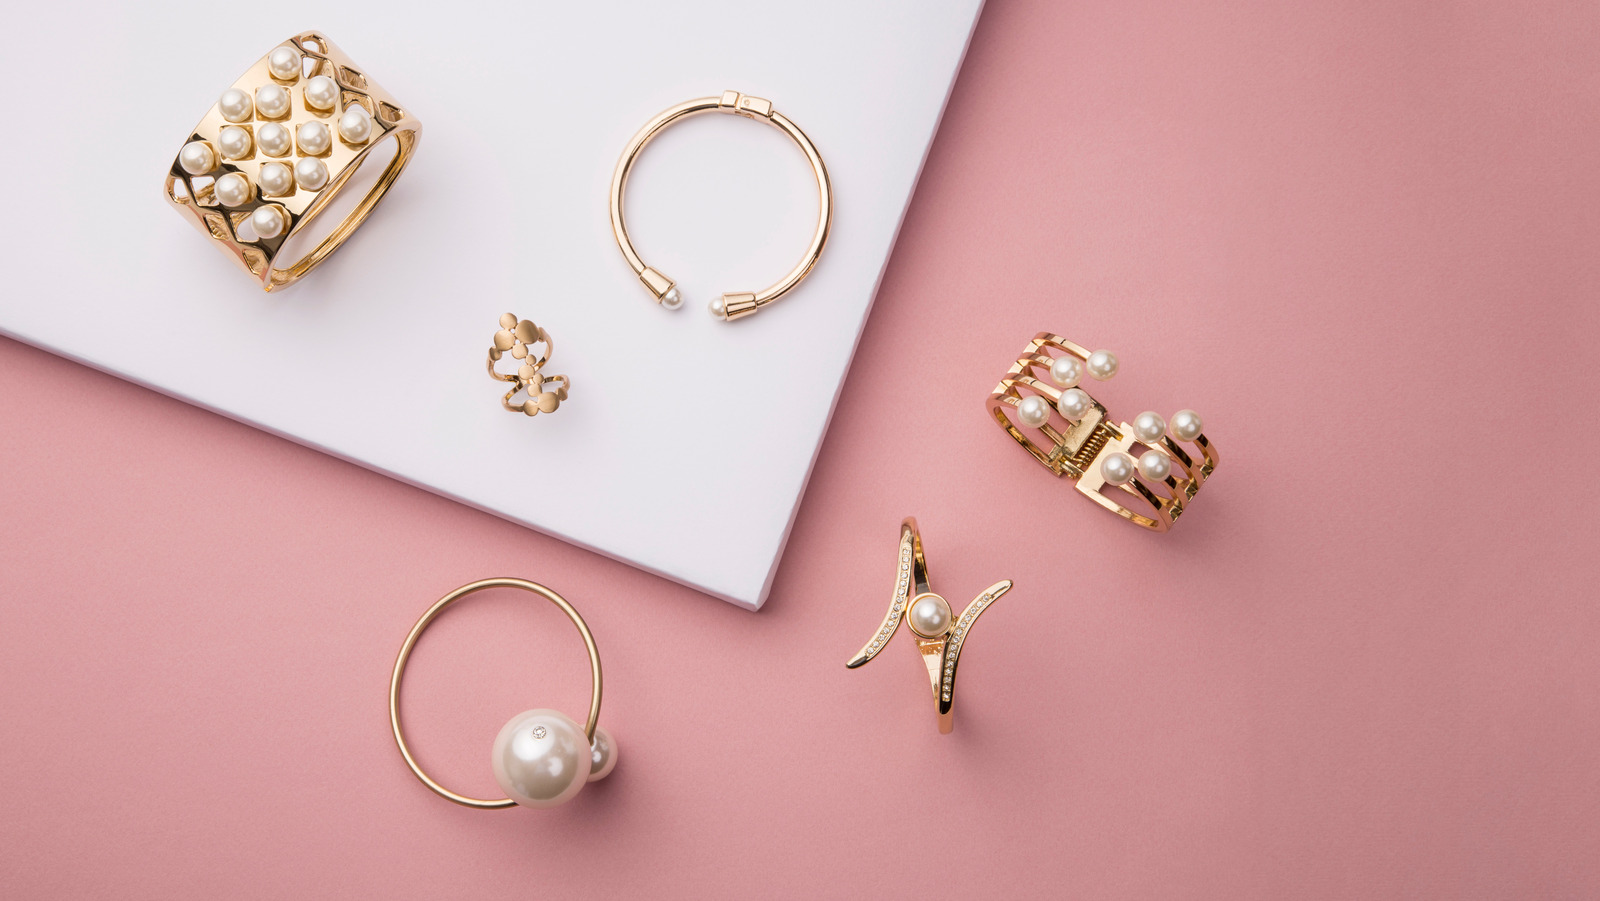 Hypoallergenic Jewelry Brands To Try If